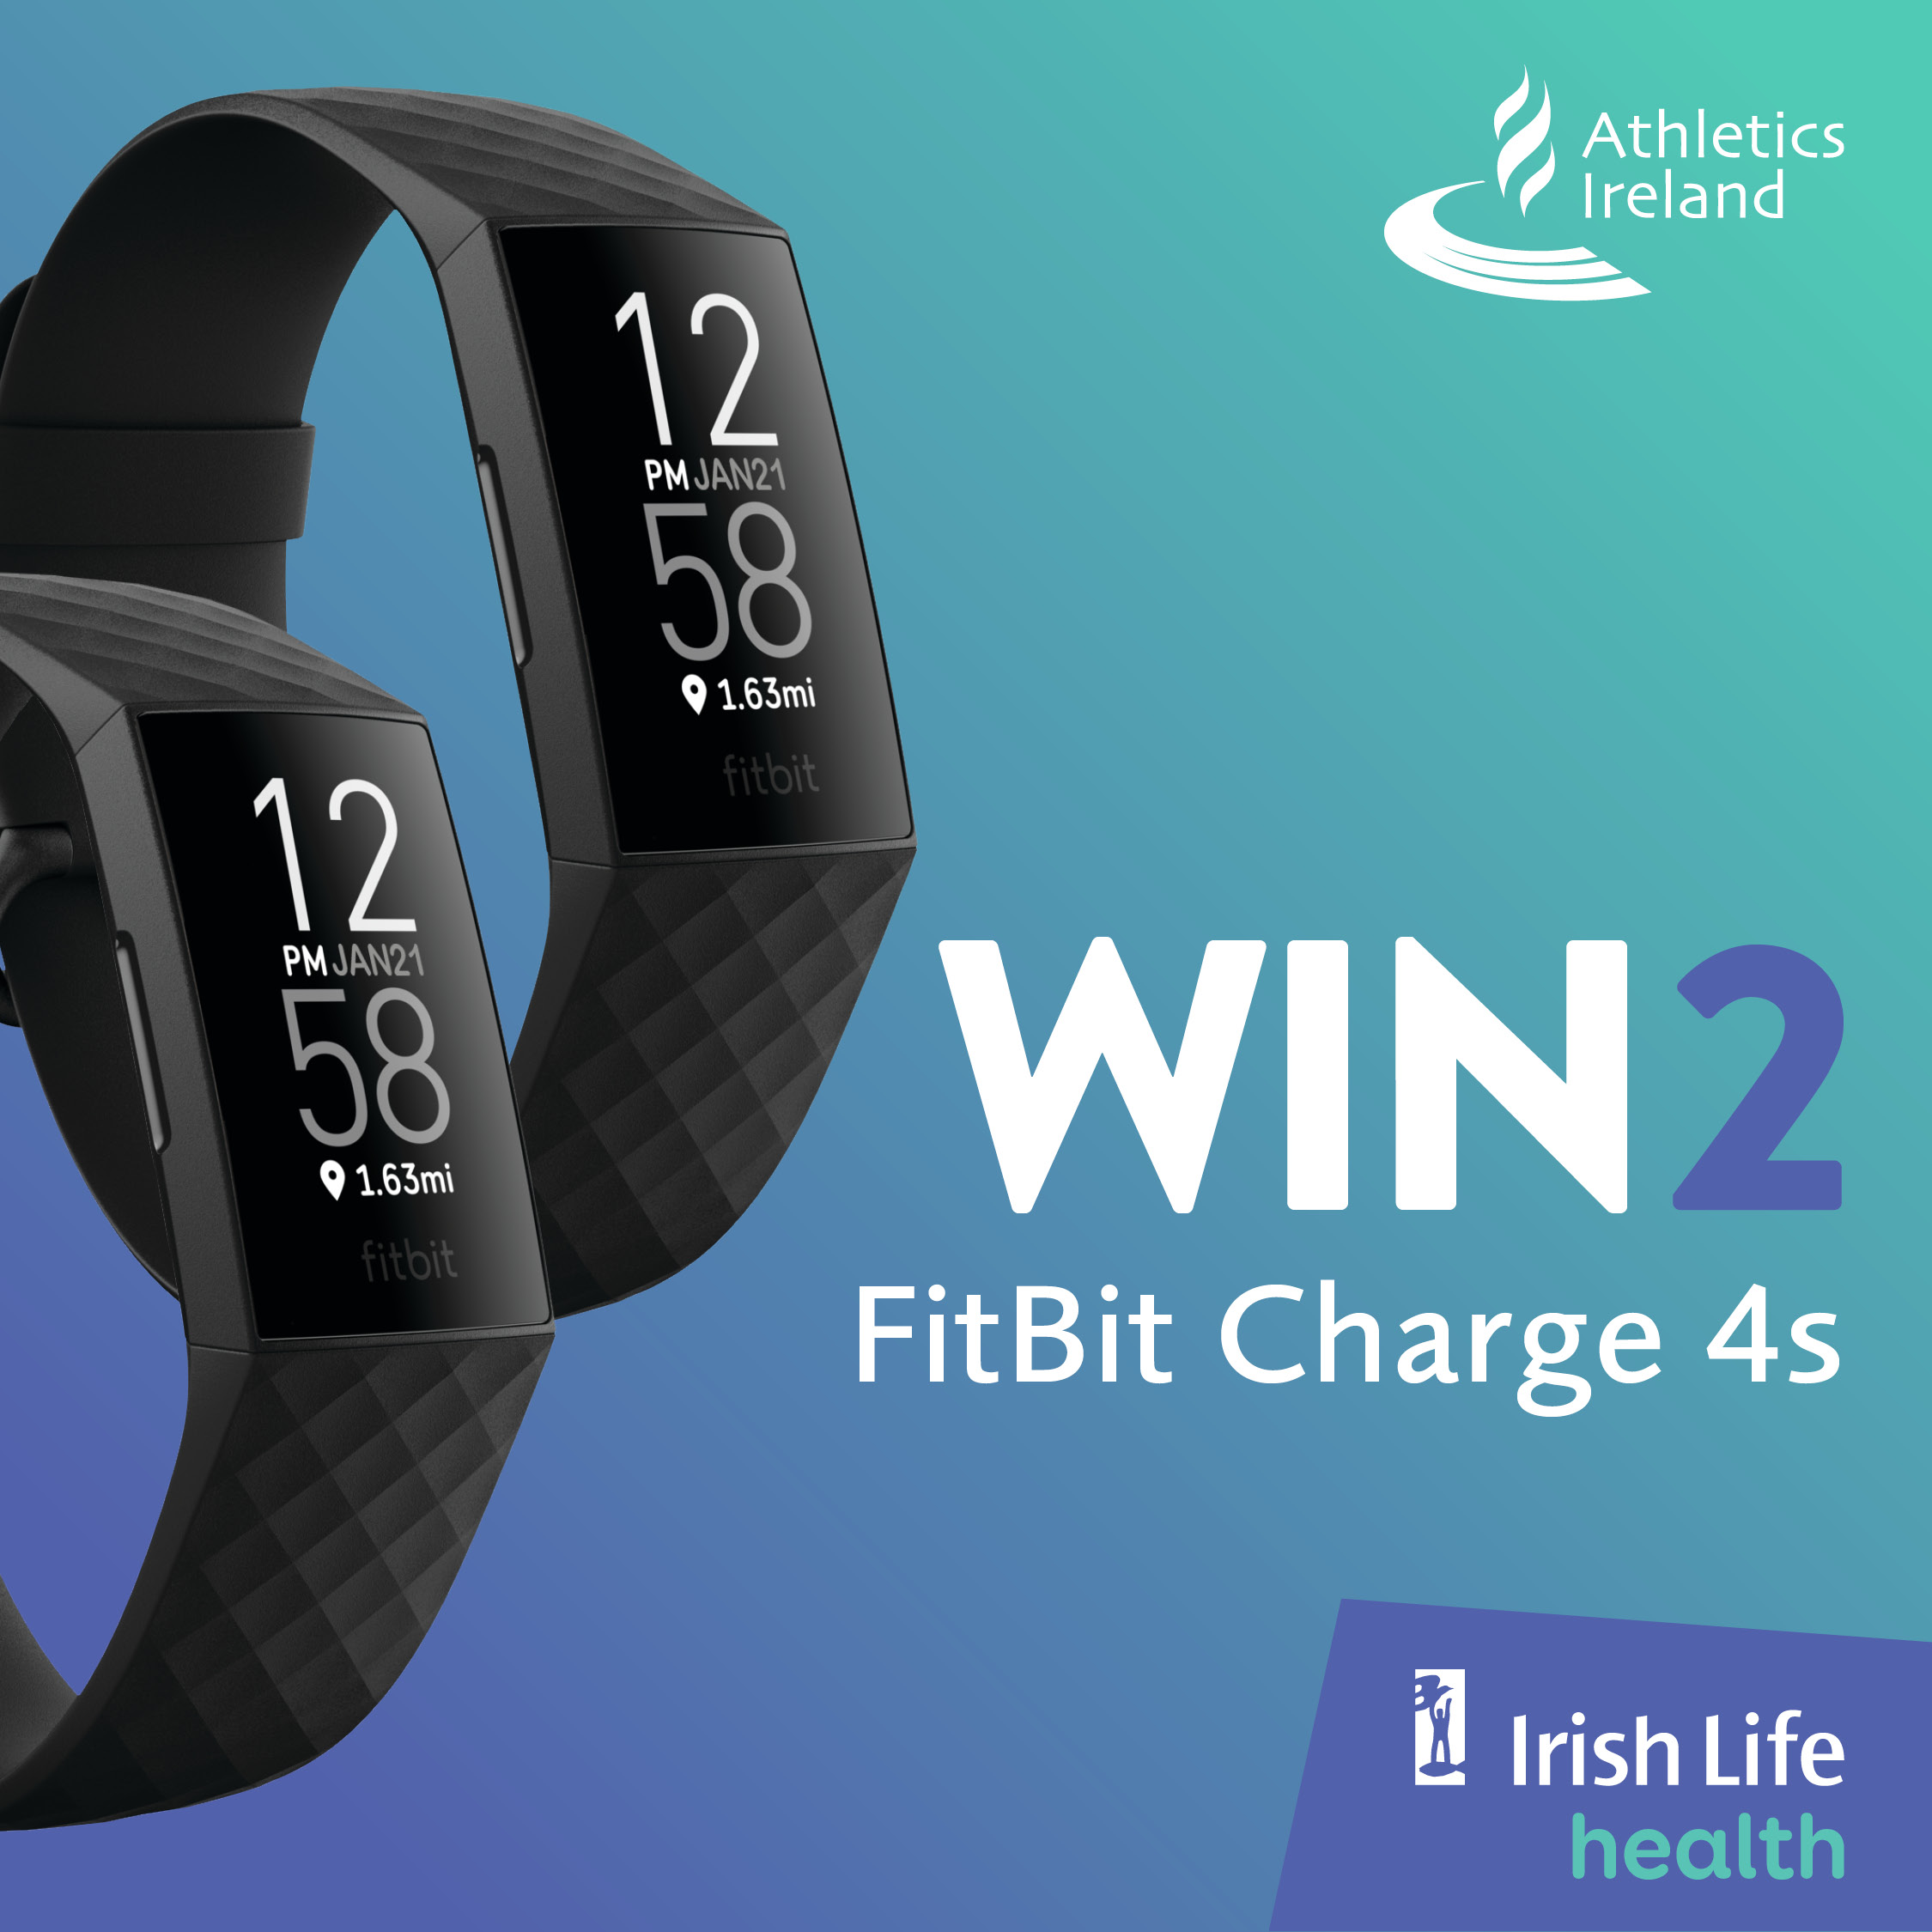 Win 2 FitBit Charge 4s with our official partner Irish Life Health